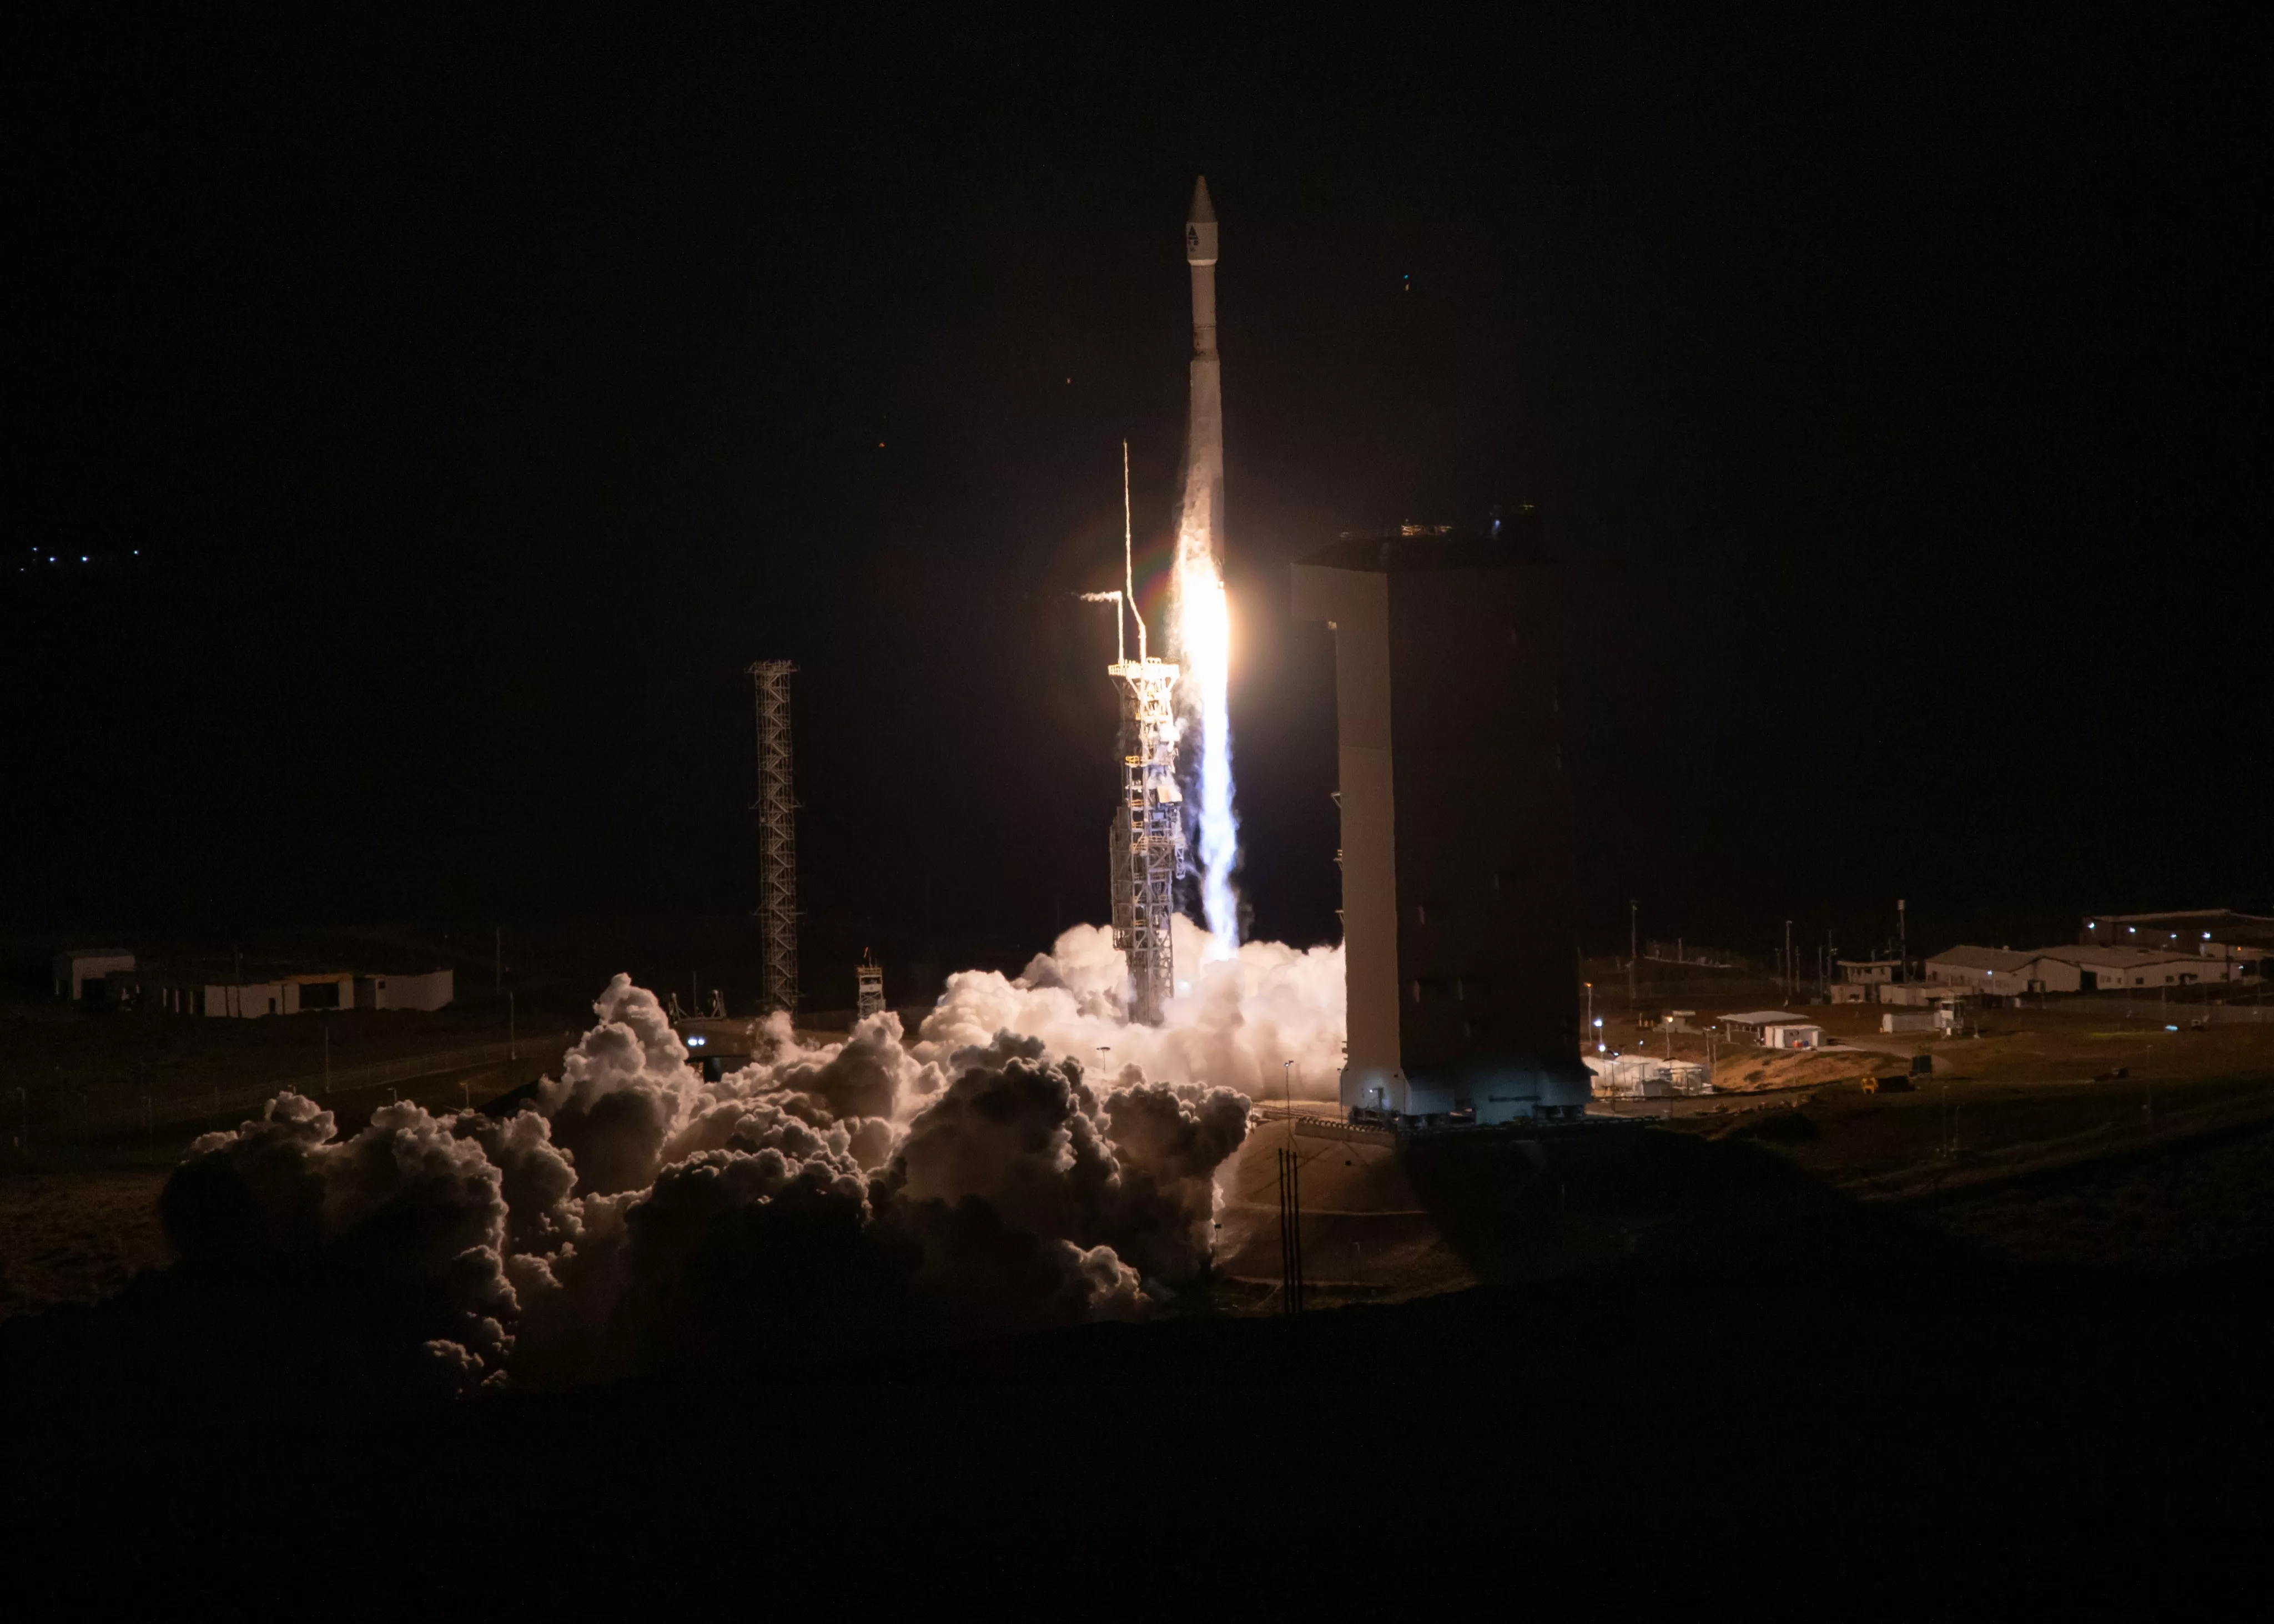 Image of the atlas five rocket launch carrying JPSS-2 Satellite